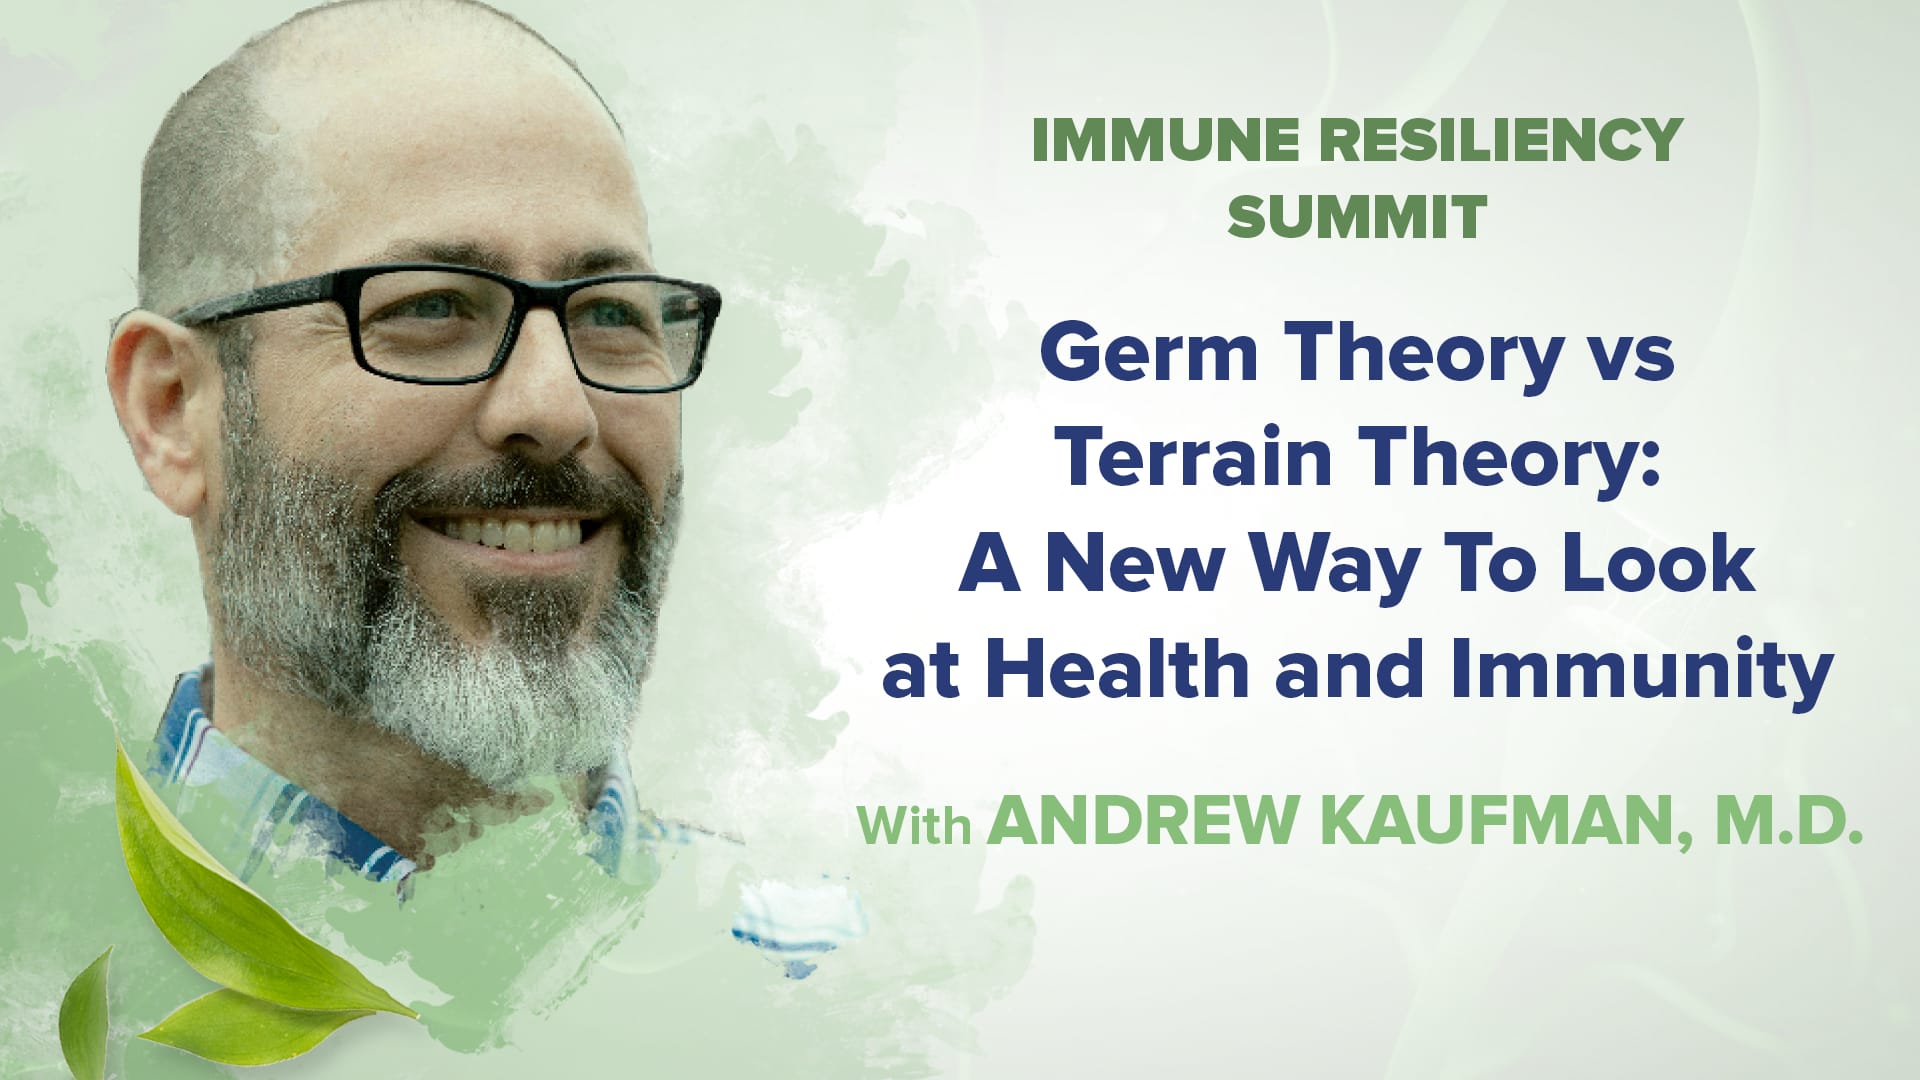 Germ Theory vs. Terrain Theory: A New Way To Look at Health and Immunity